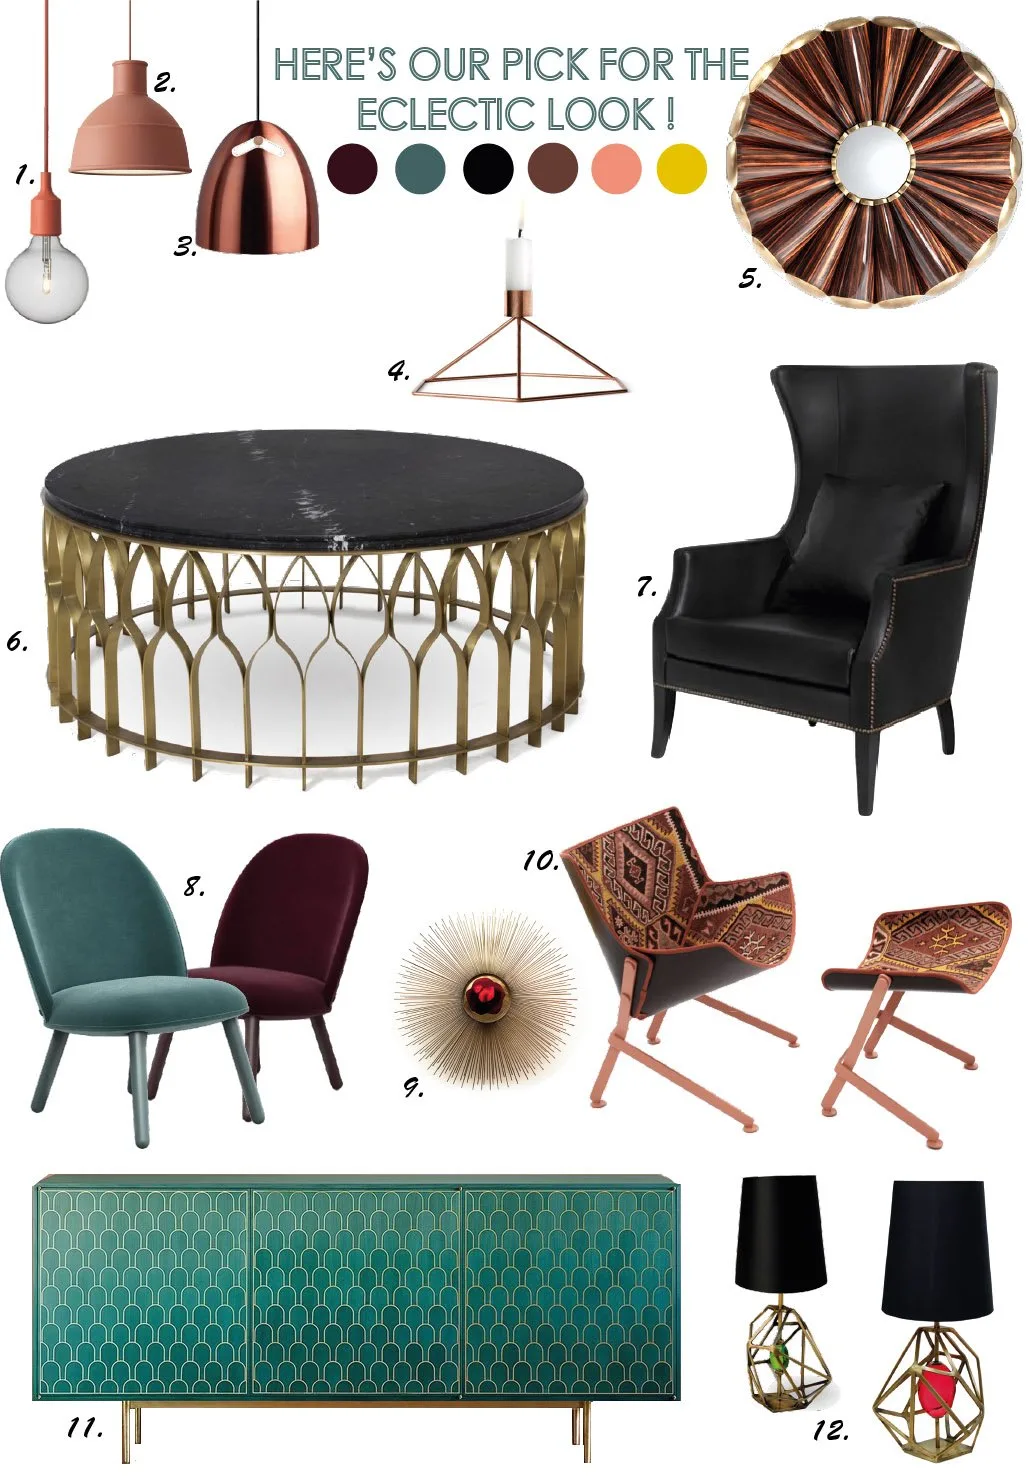 eclectic decor - lounge chairs, pendant light, wall mirror, coffee table, footrest, storage furnture, table table